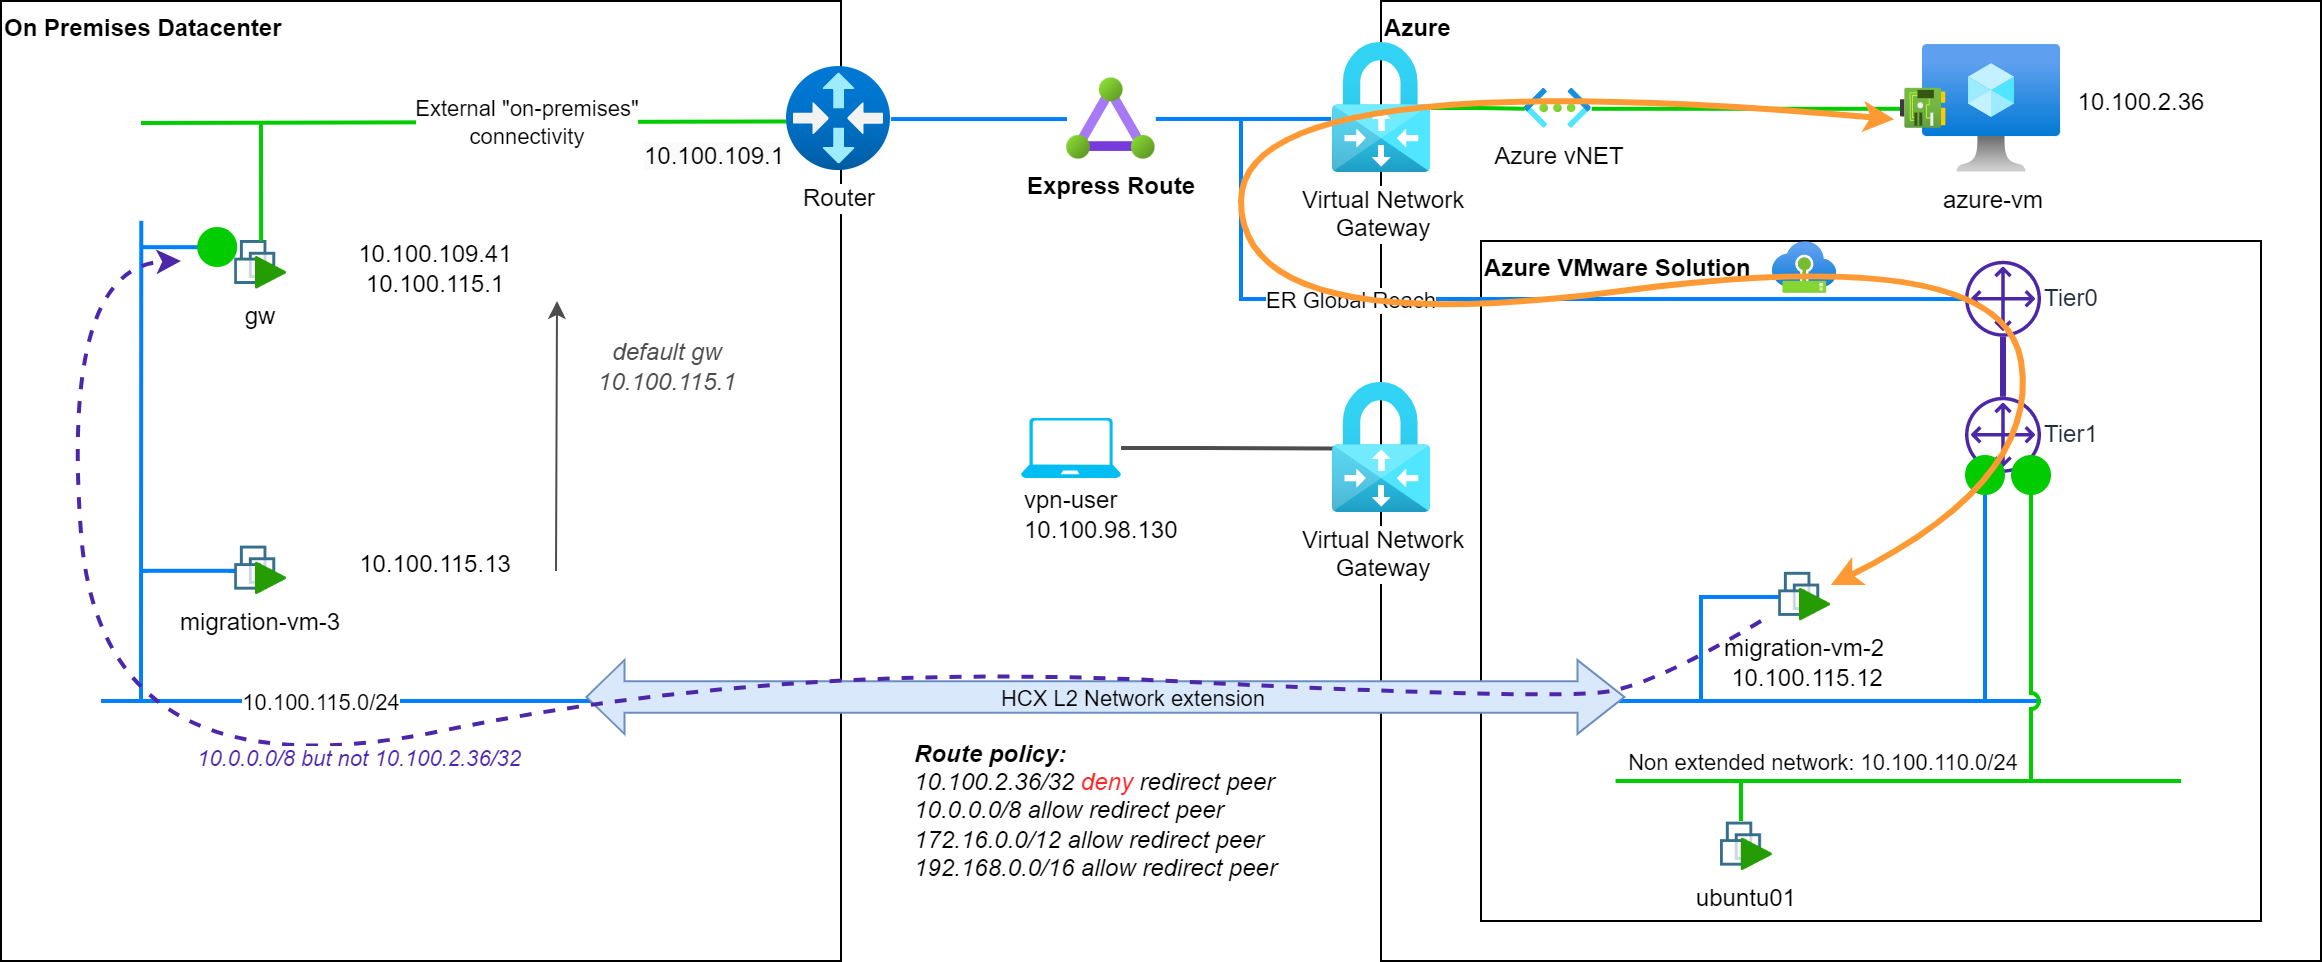 Network path when there is a very specific policy routes